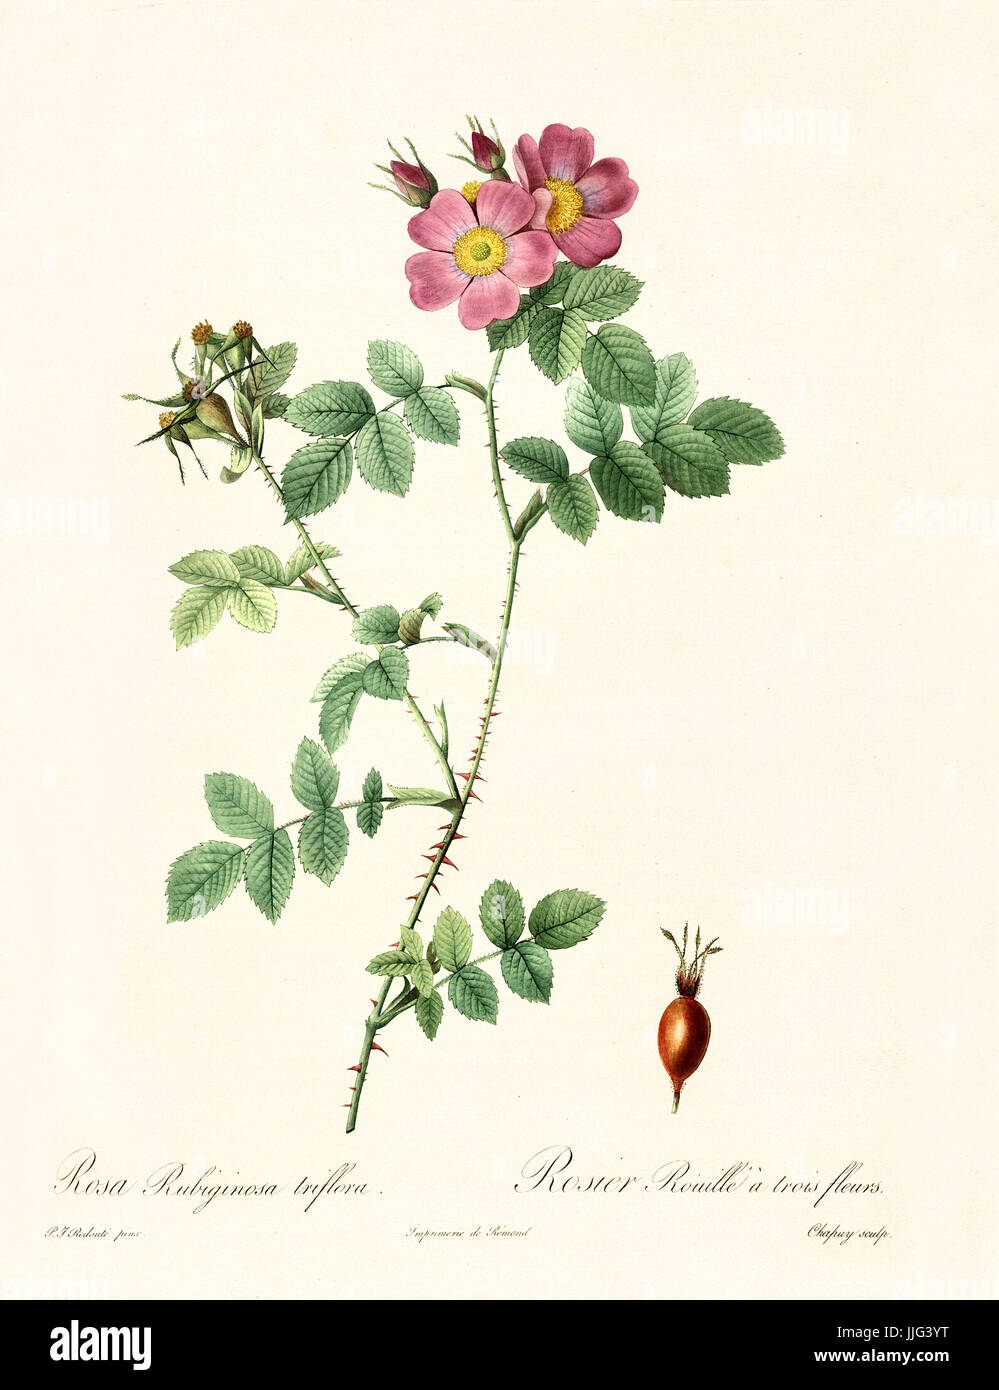 Old illustration of Rosa rubiginosa triflora. Created by P. R. Redoute, published on Les Roses, Imp. Firmin Didot, Paris, 1817-24 Stock Photo